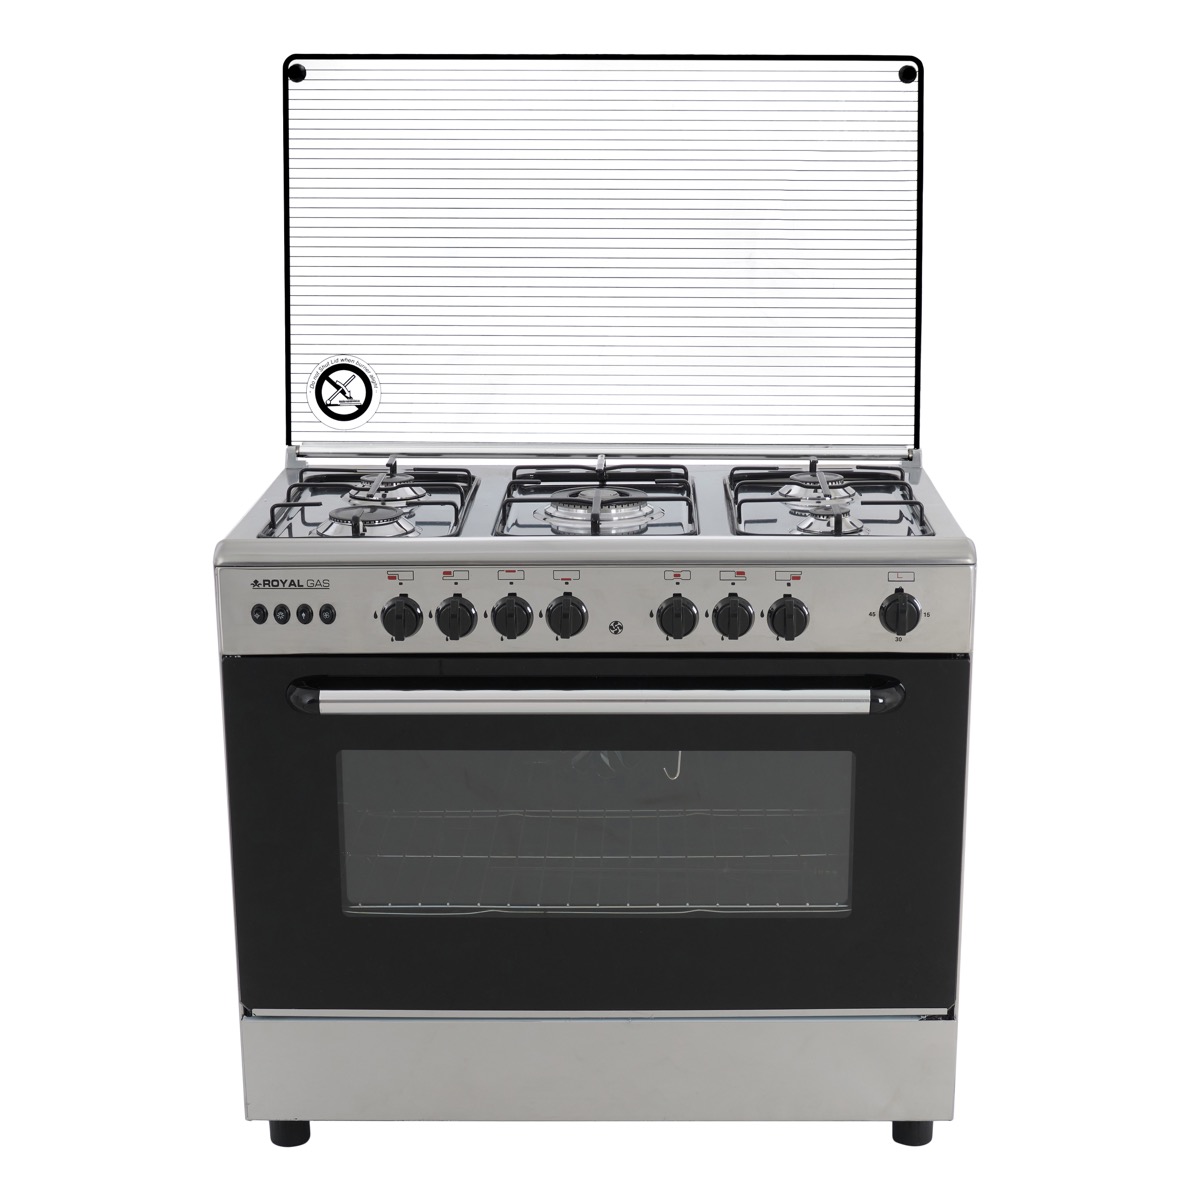 Royal Gas Cooker, 5 Burners, Stainless Steel - FT90ESSMV